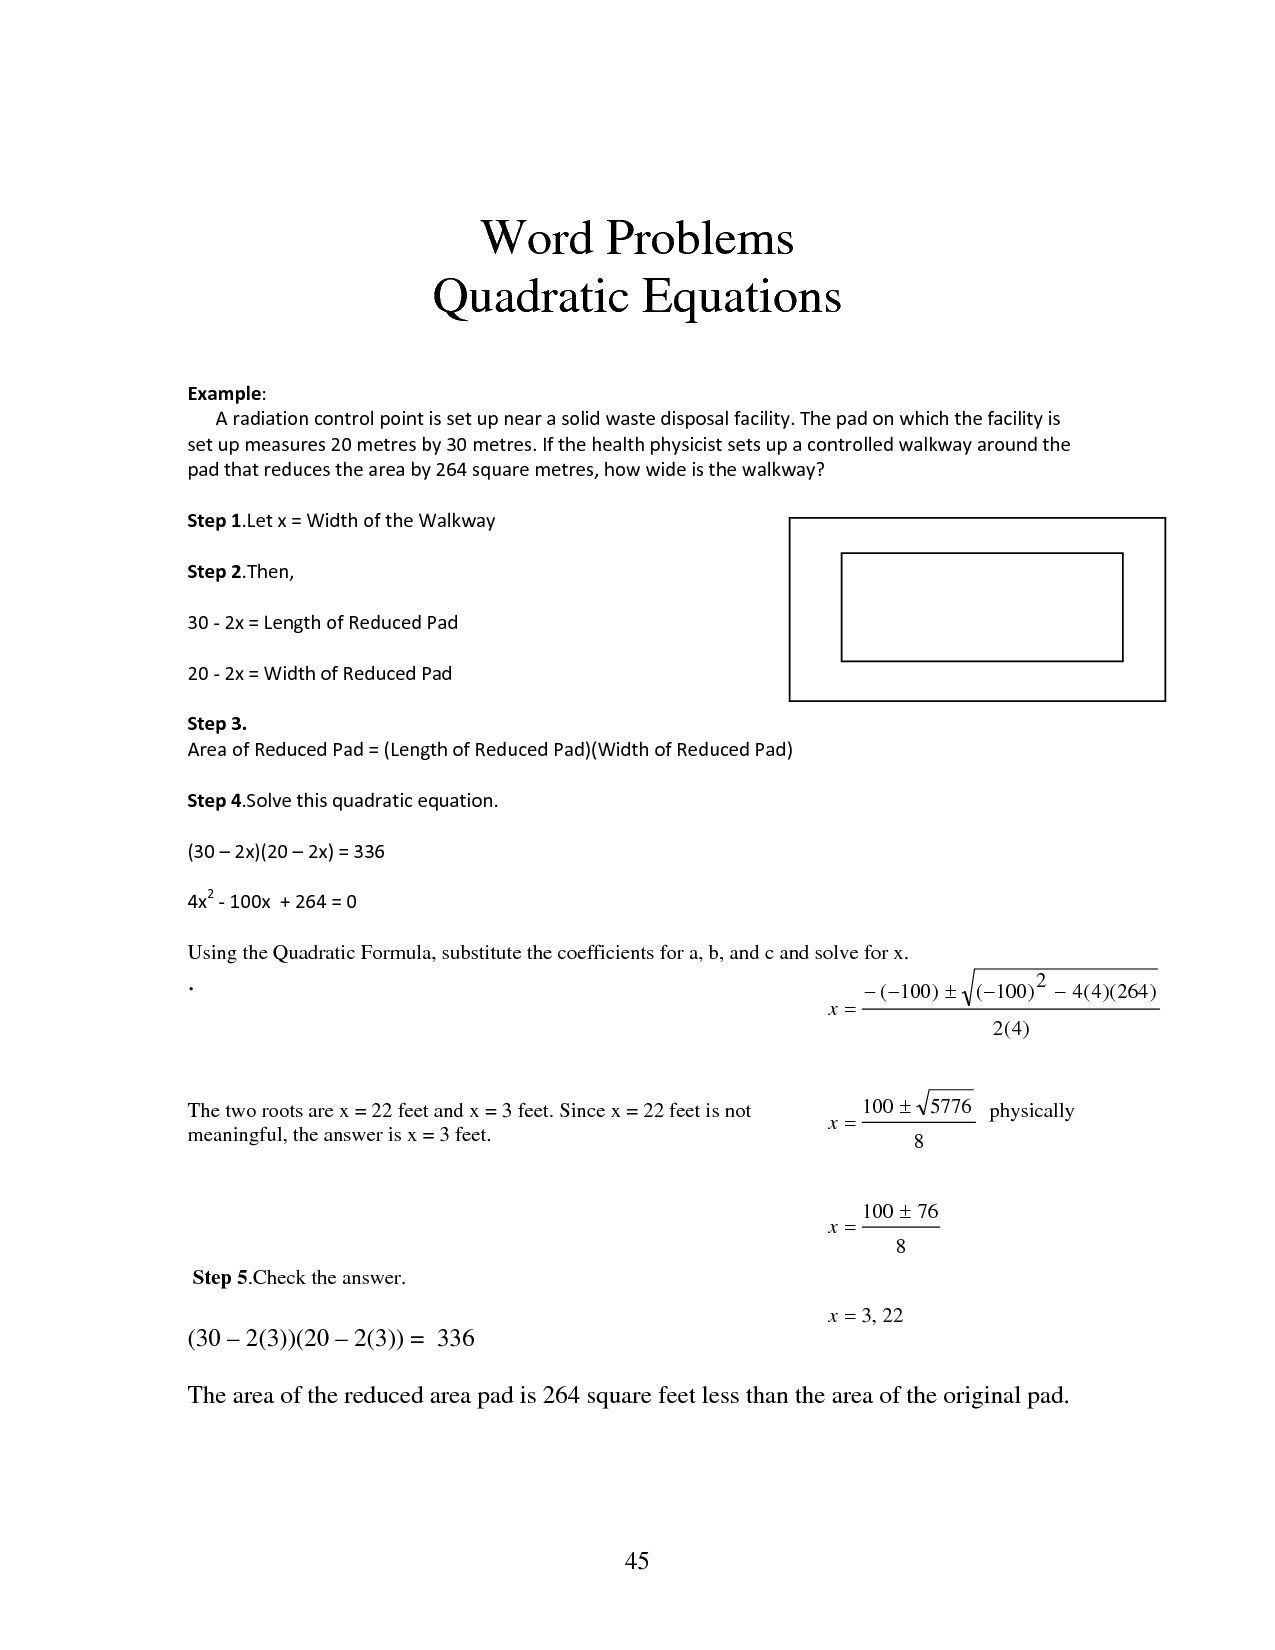 motion-in-one-dimension-worksheet-answers-db-excel